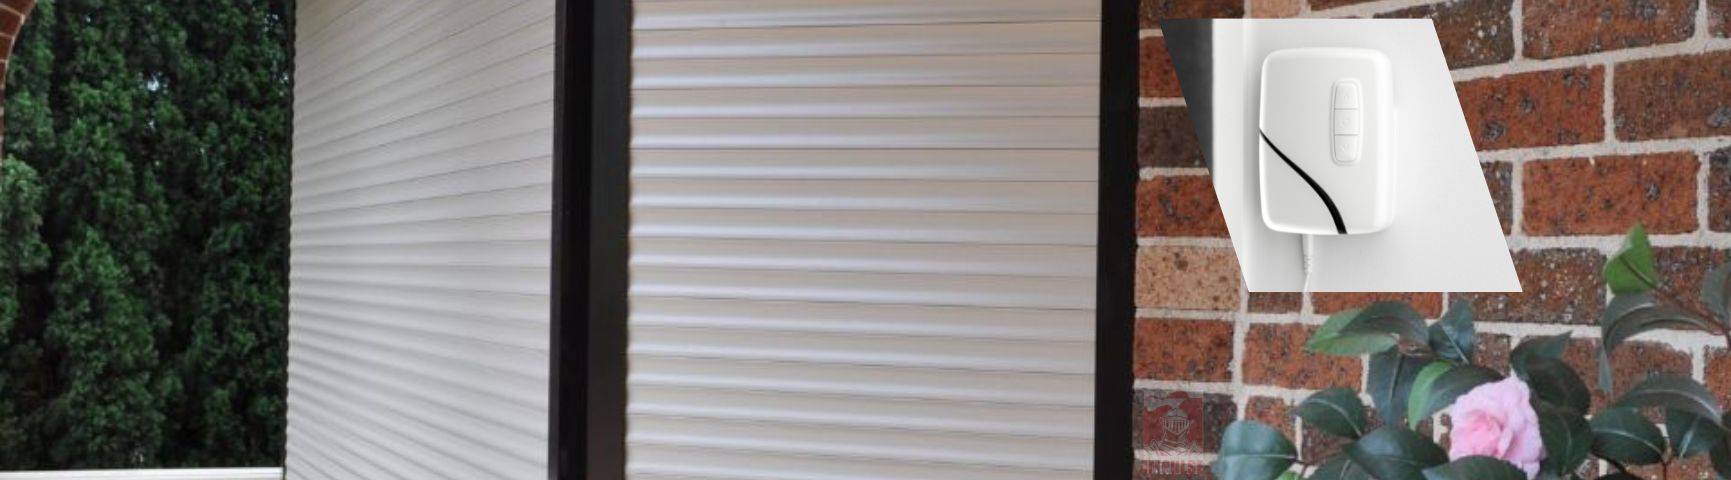 Smart Drive Battery Operated Shutters